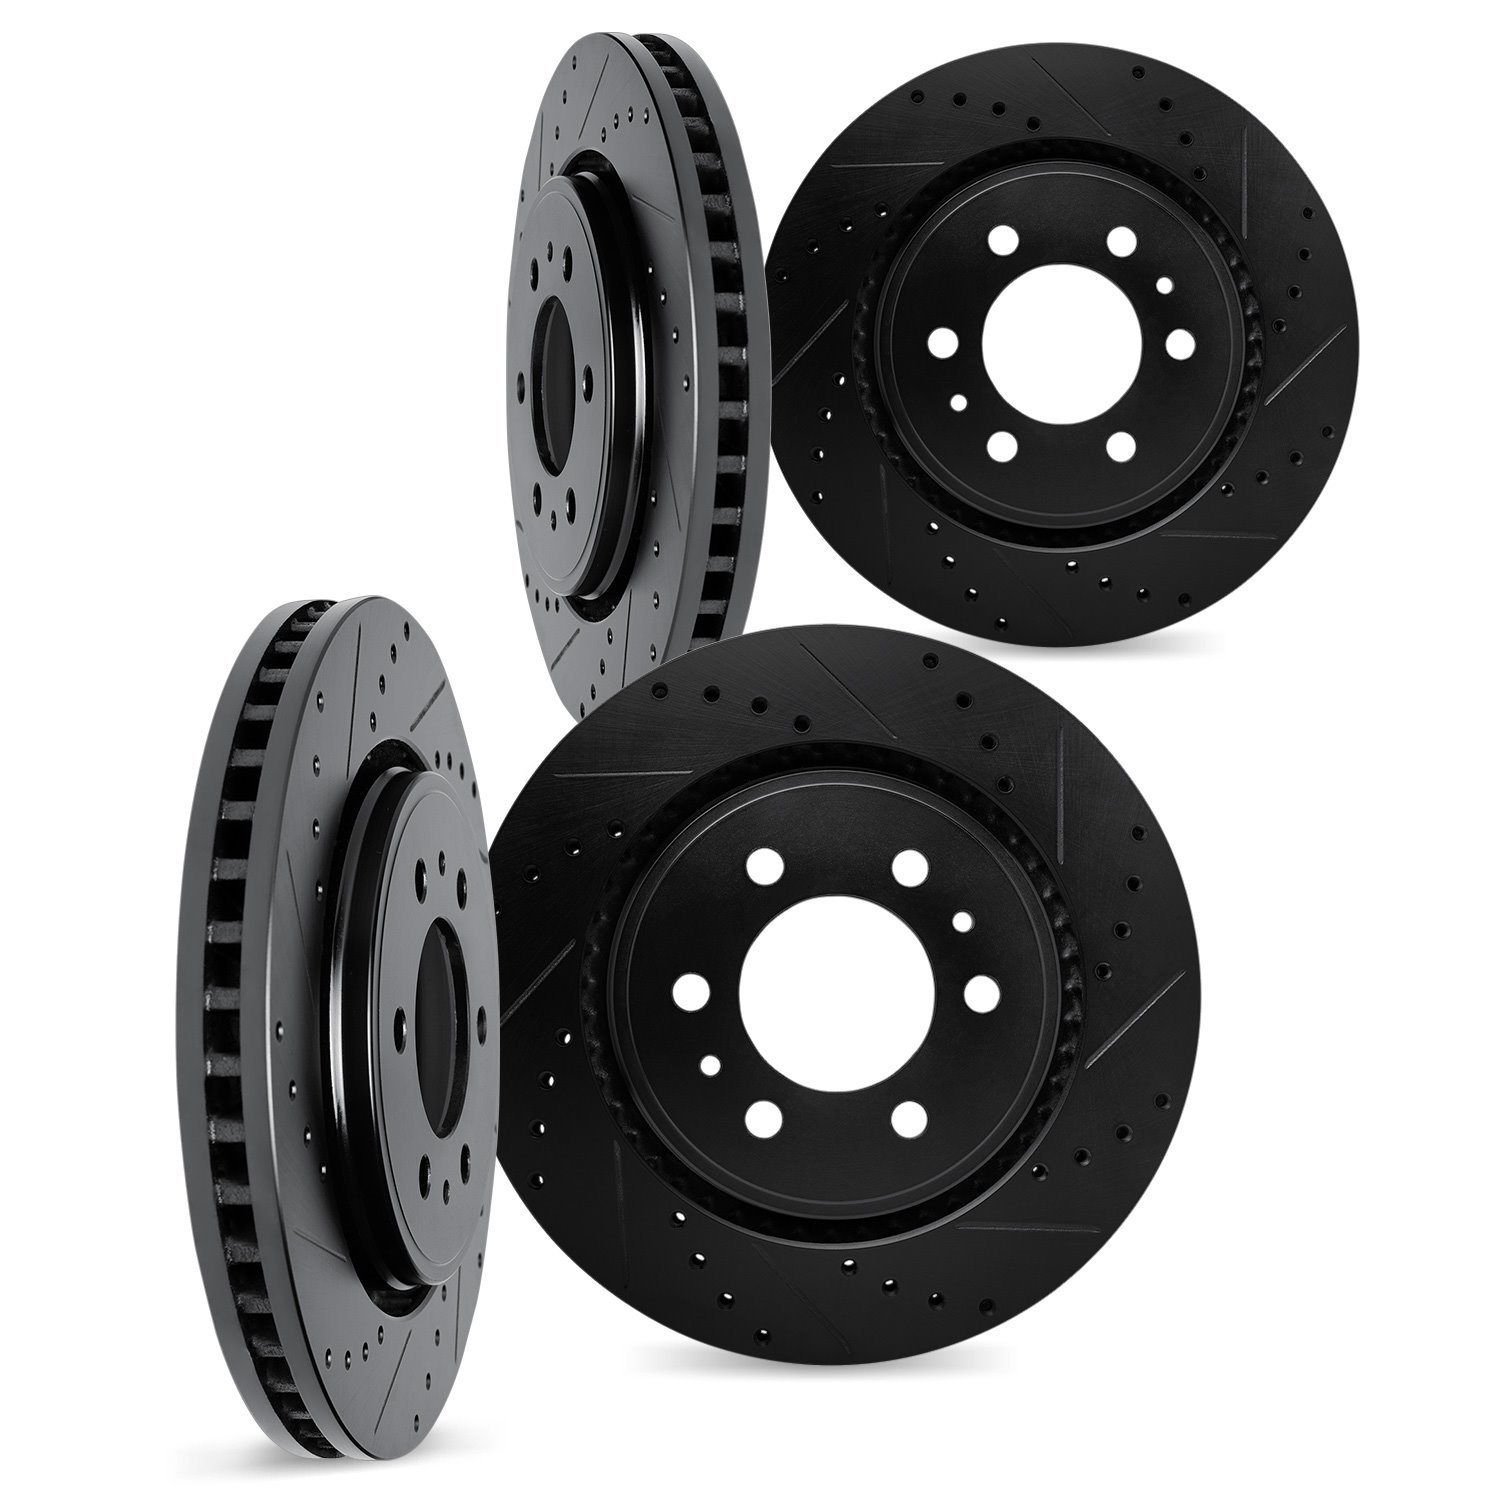 8004-67102 Drilled/Slotted Brake Rotors [Black], 2005-2012 Infiniti/Nissan, Position: Front and Rear